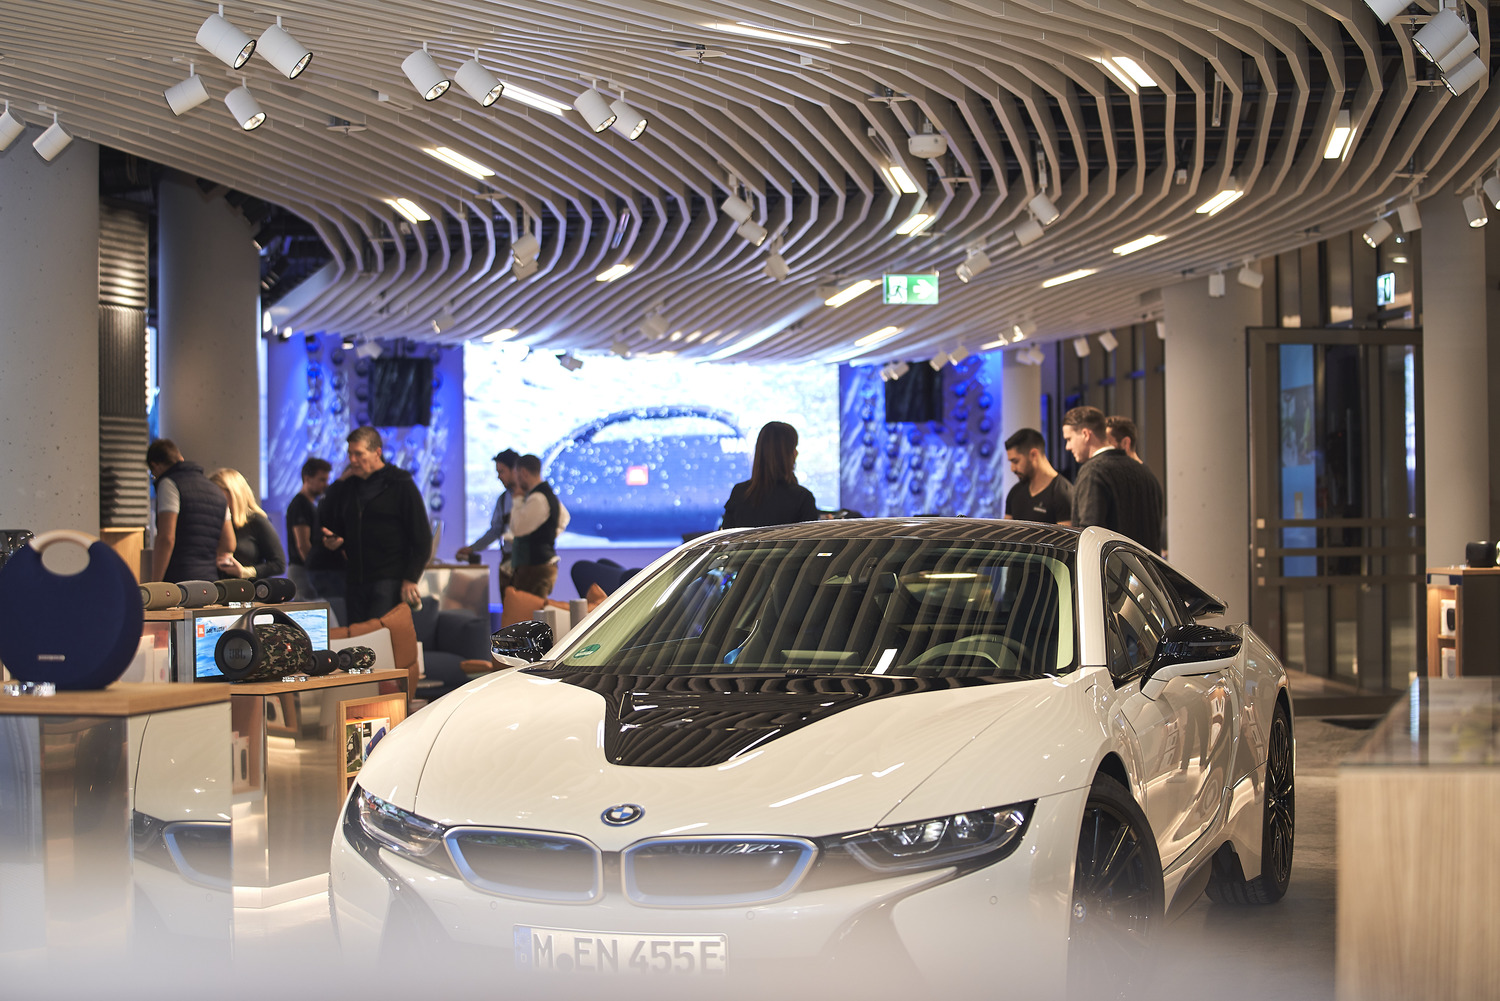 A white sports car in a showroom with people standing around.